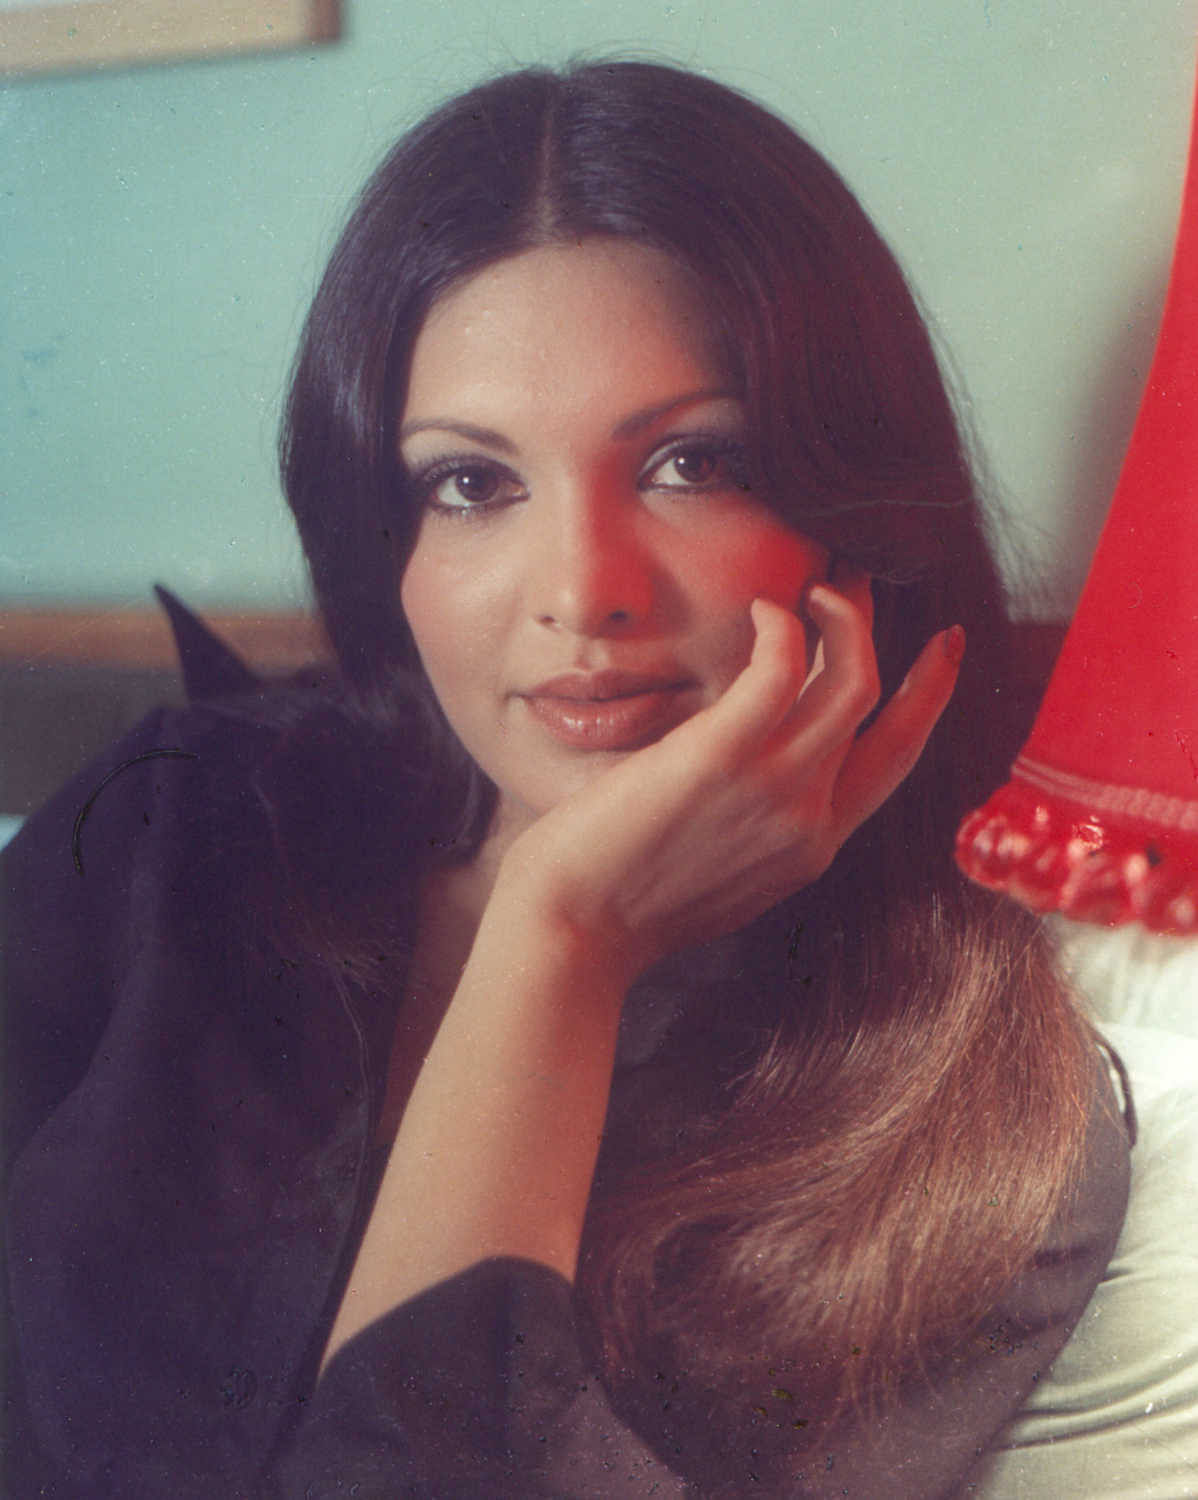 The media thought of Parveen Babi only as a crazy woman who caught the public eye from time to time.